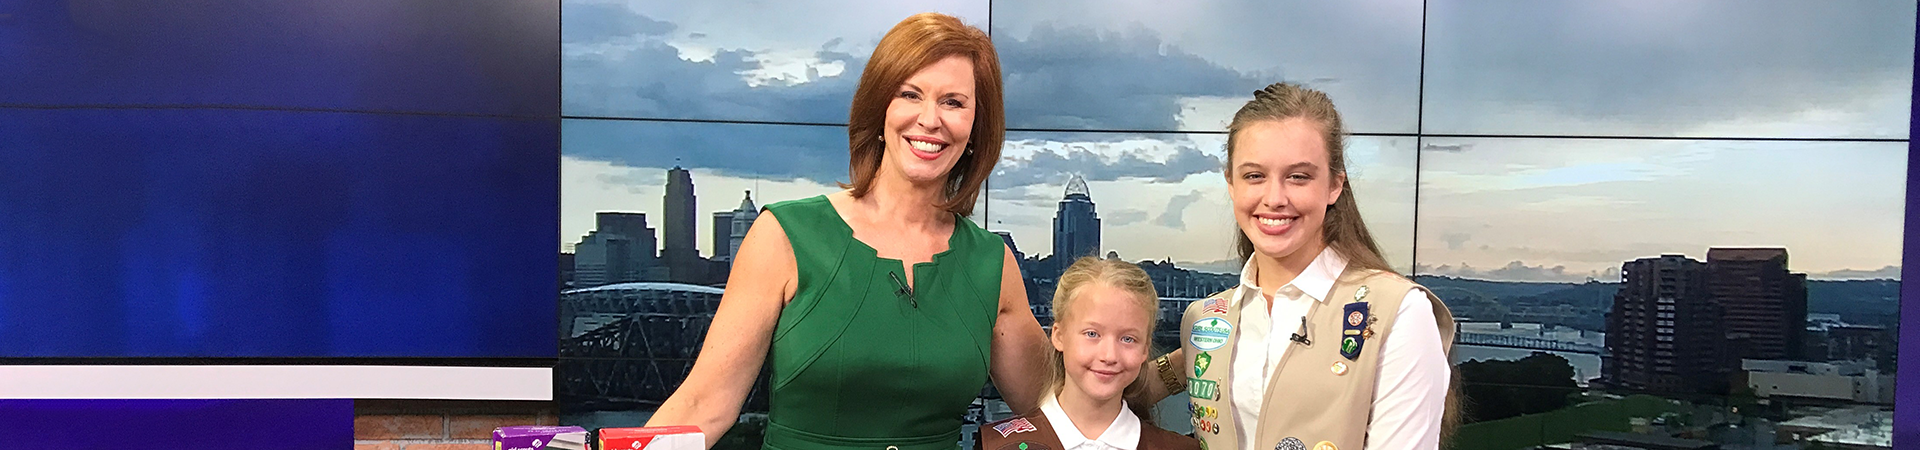  two girl scouts stand at a news desk with a newscaster 